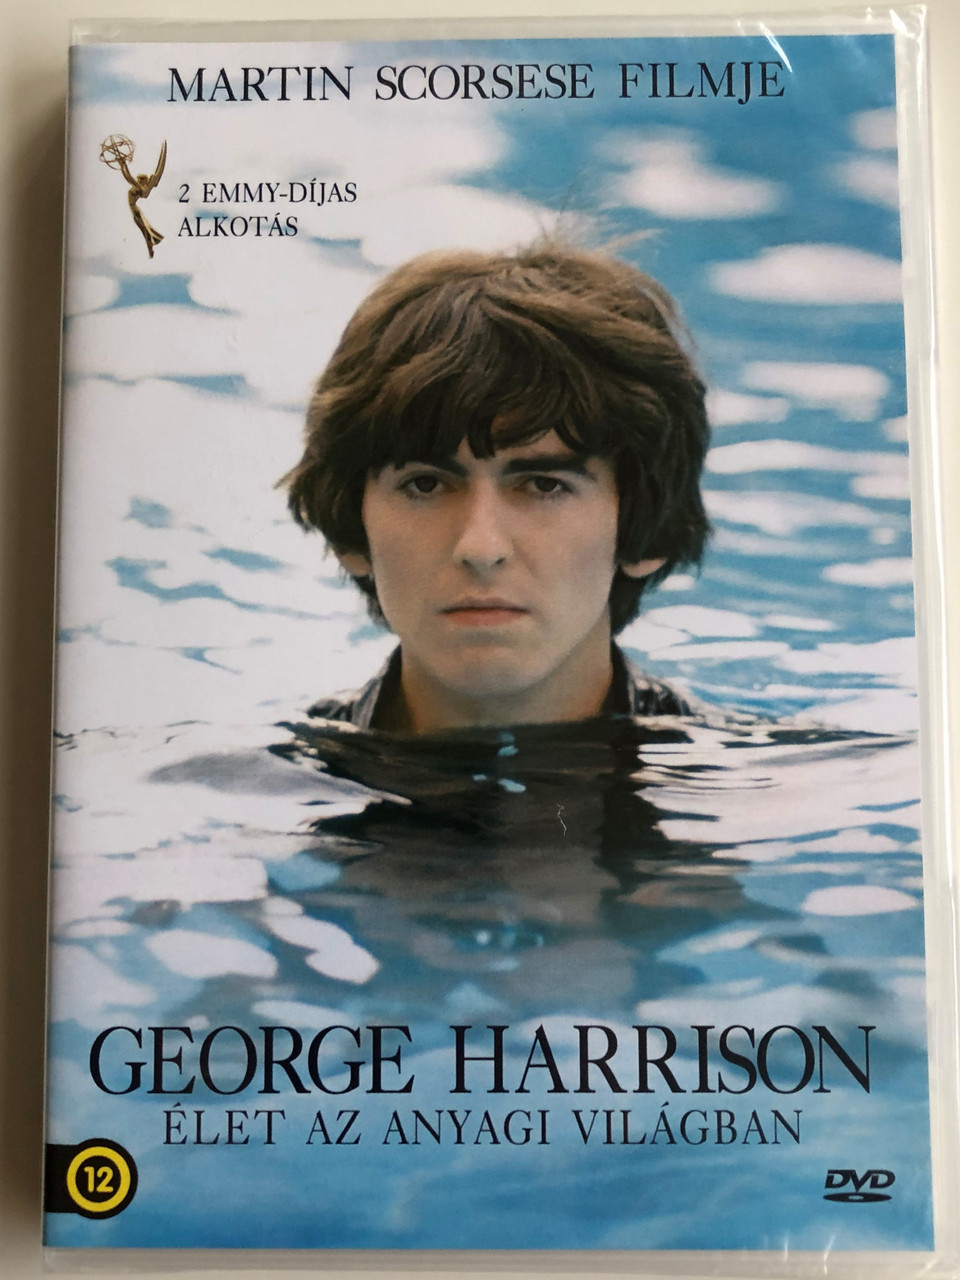 George Harrison Living in the Material World DVD 2011 George Harrison -  Élet az anyagi világban / Directed by Martin Scorsese / Documentary about  Beatles band member - bibleinmylanguage